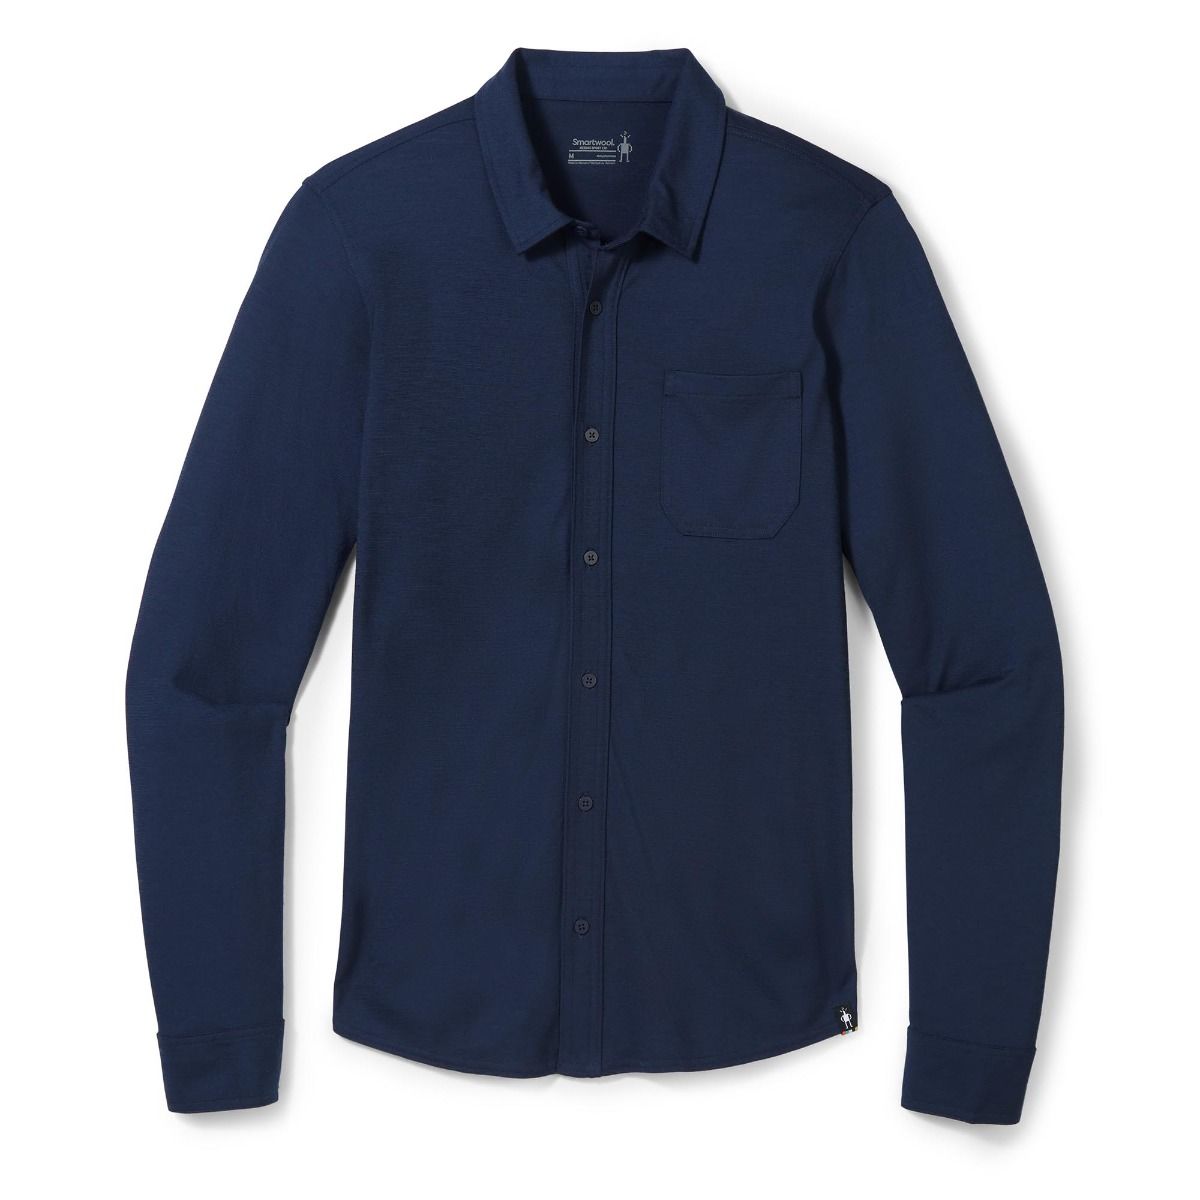 Men's Long Sleeve Button Up | Smartwool Canada